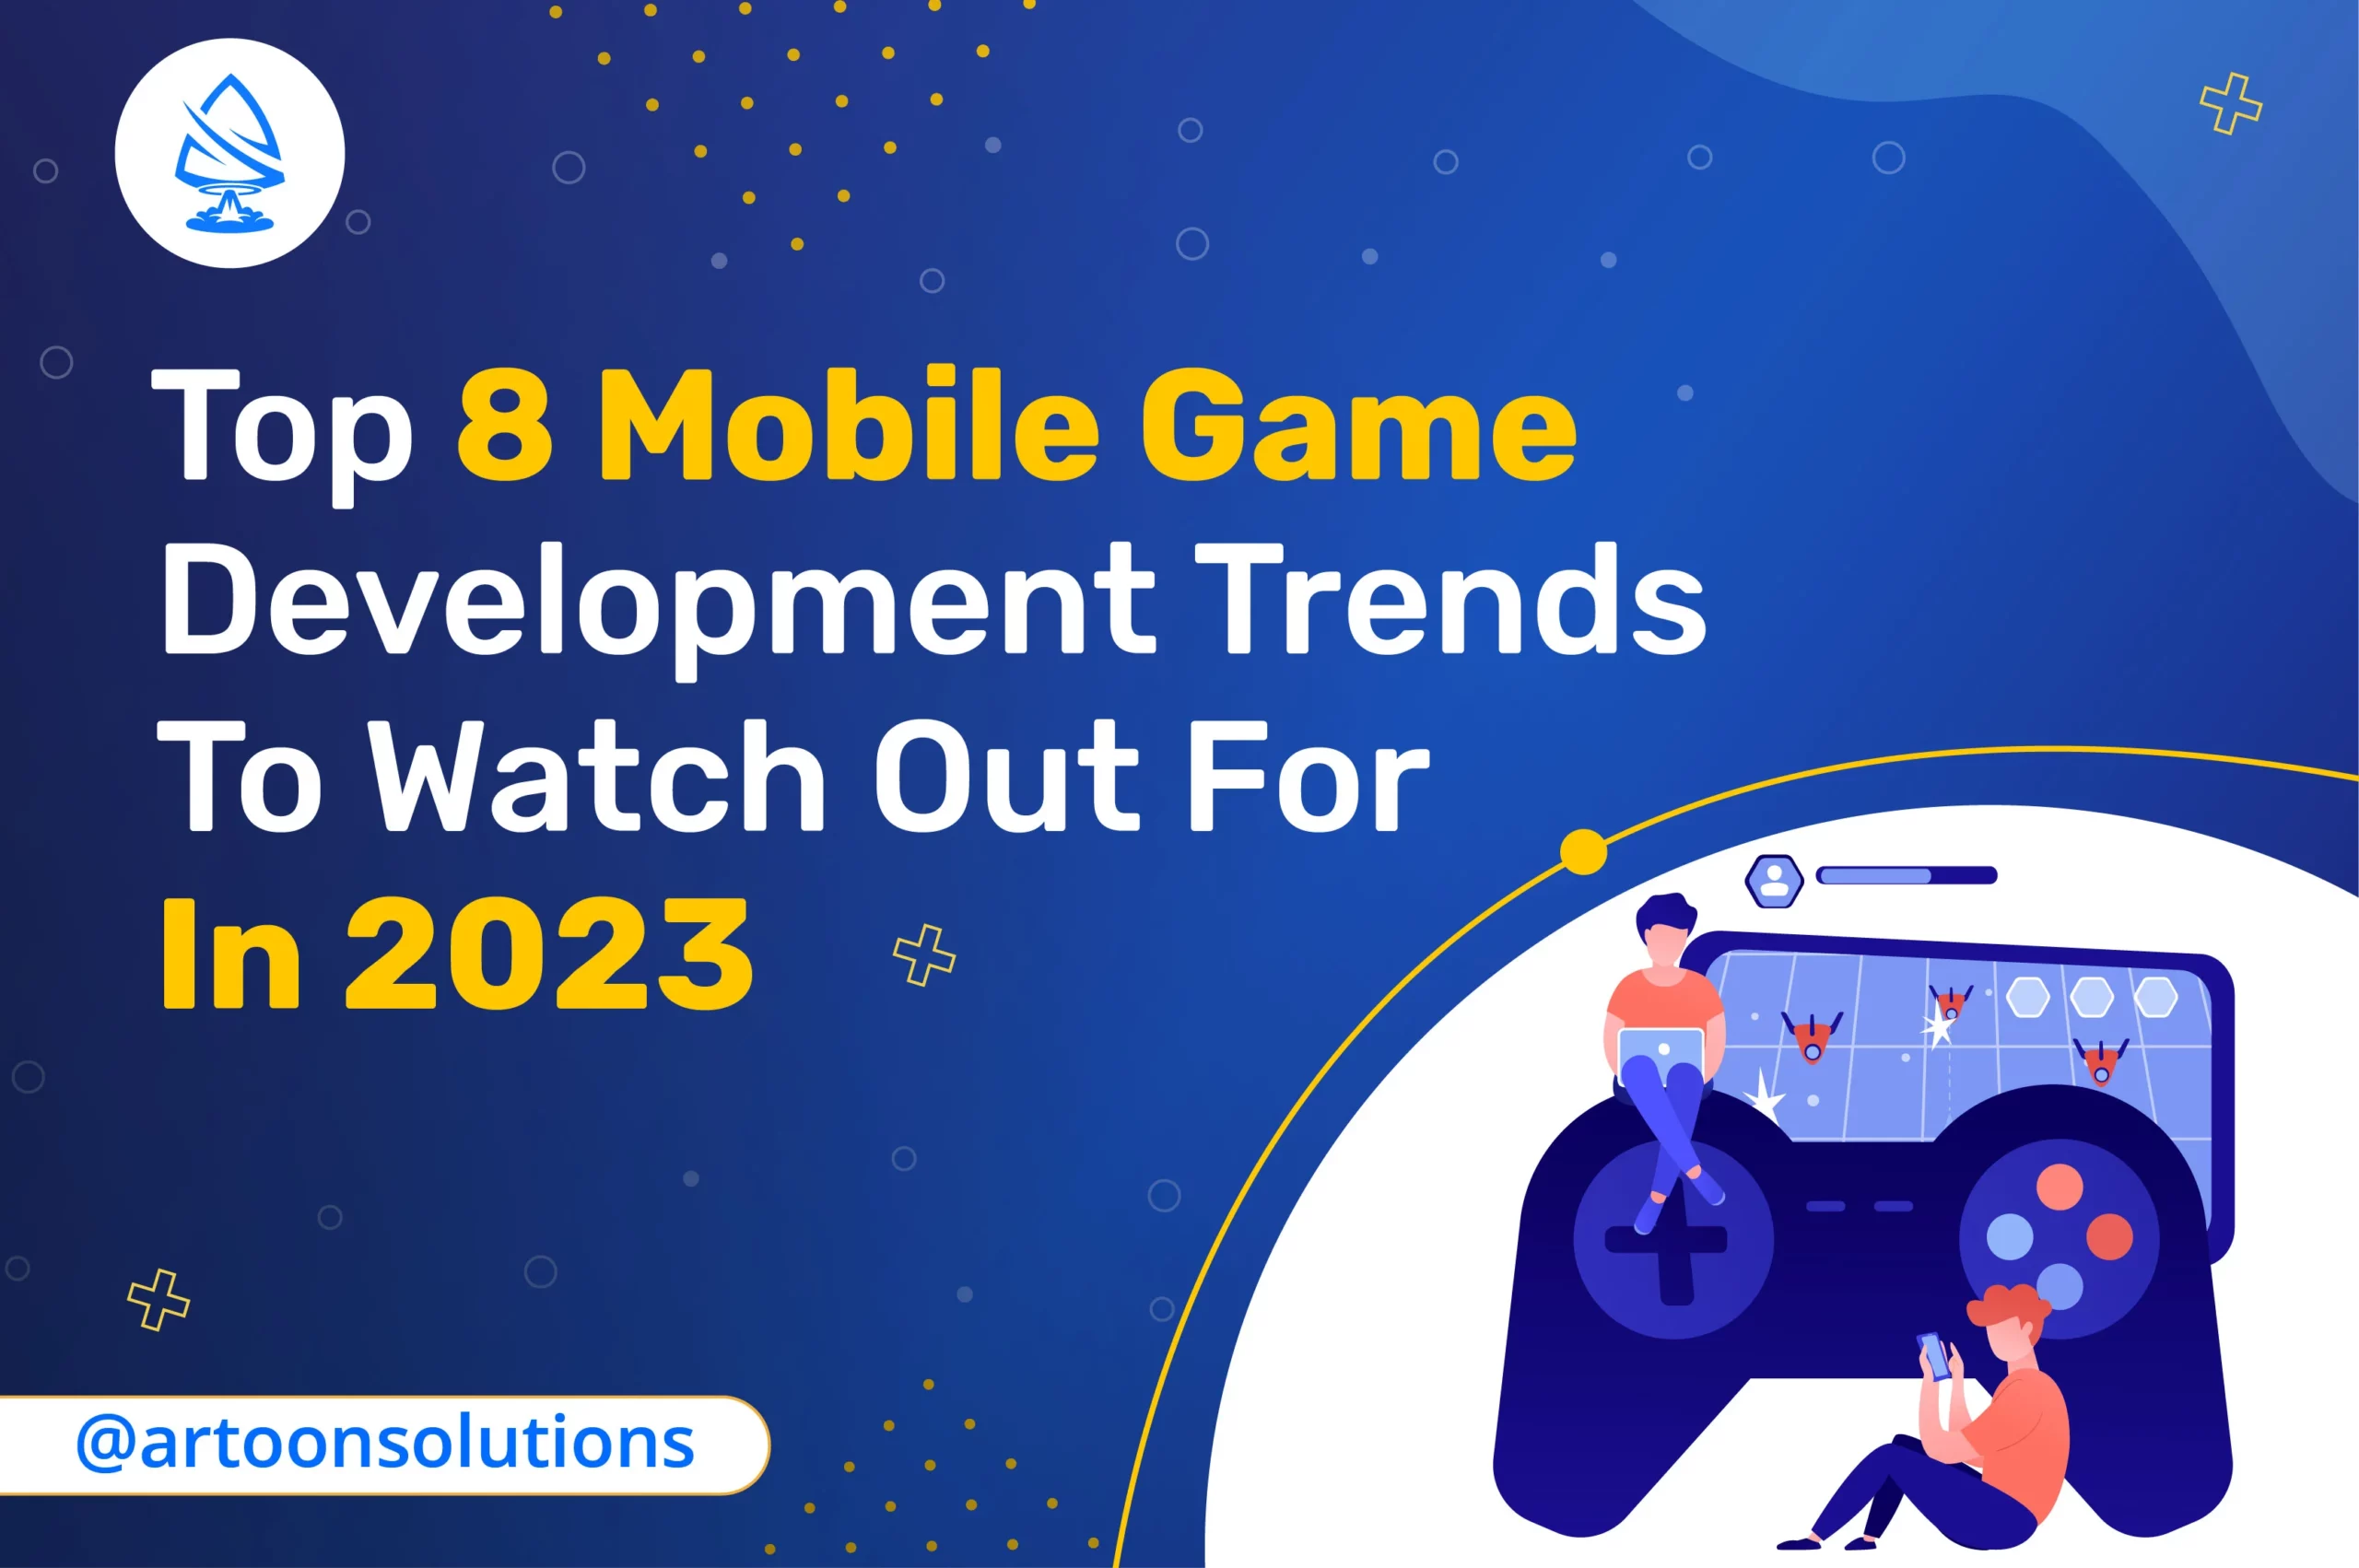 Top 8 Mobile Game Development Trends To Watch Out In 2023